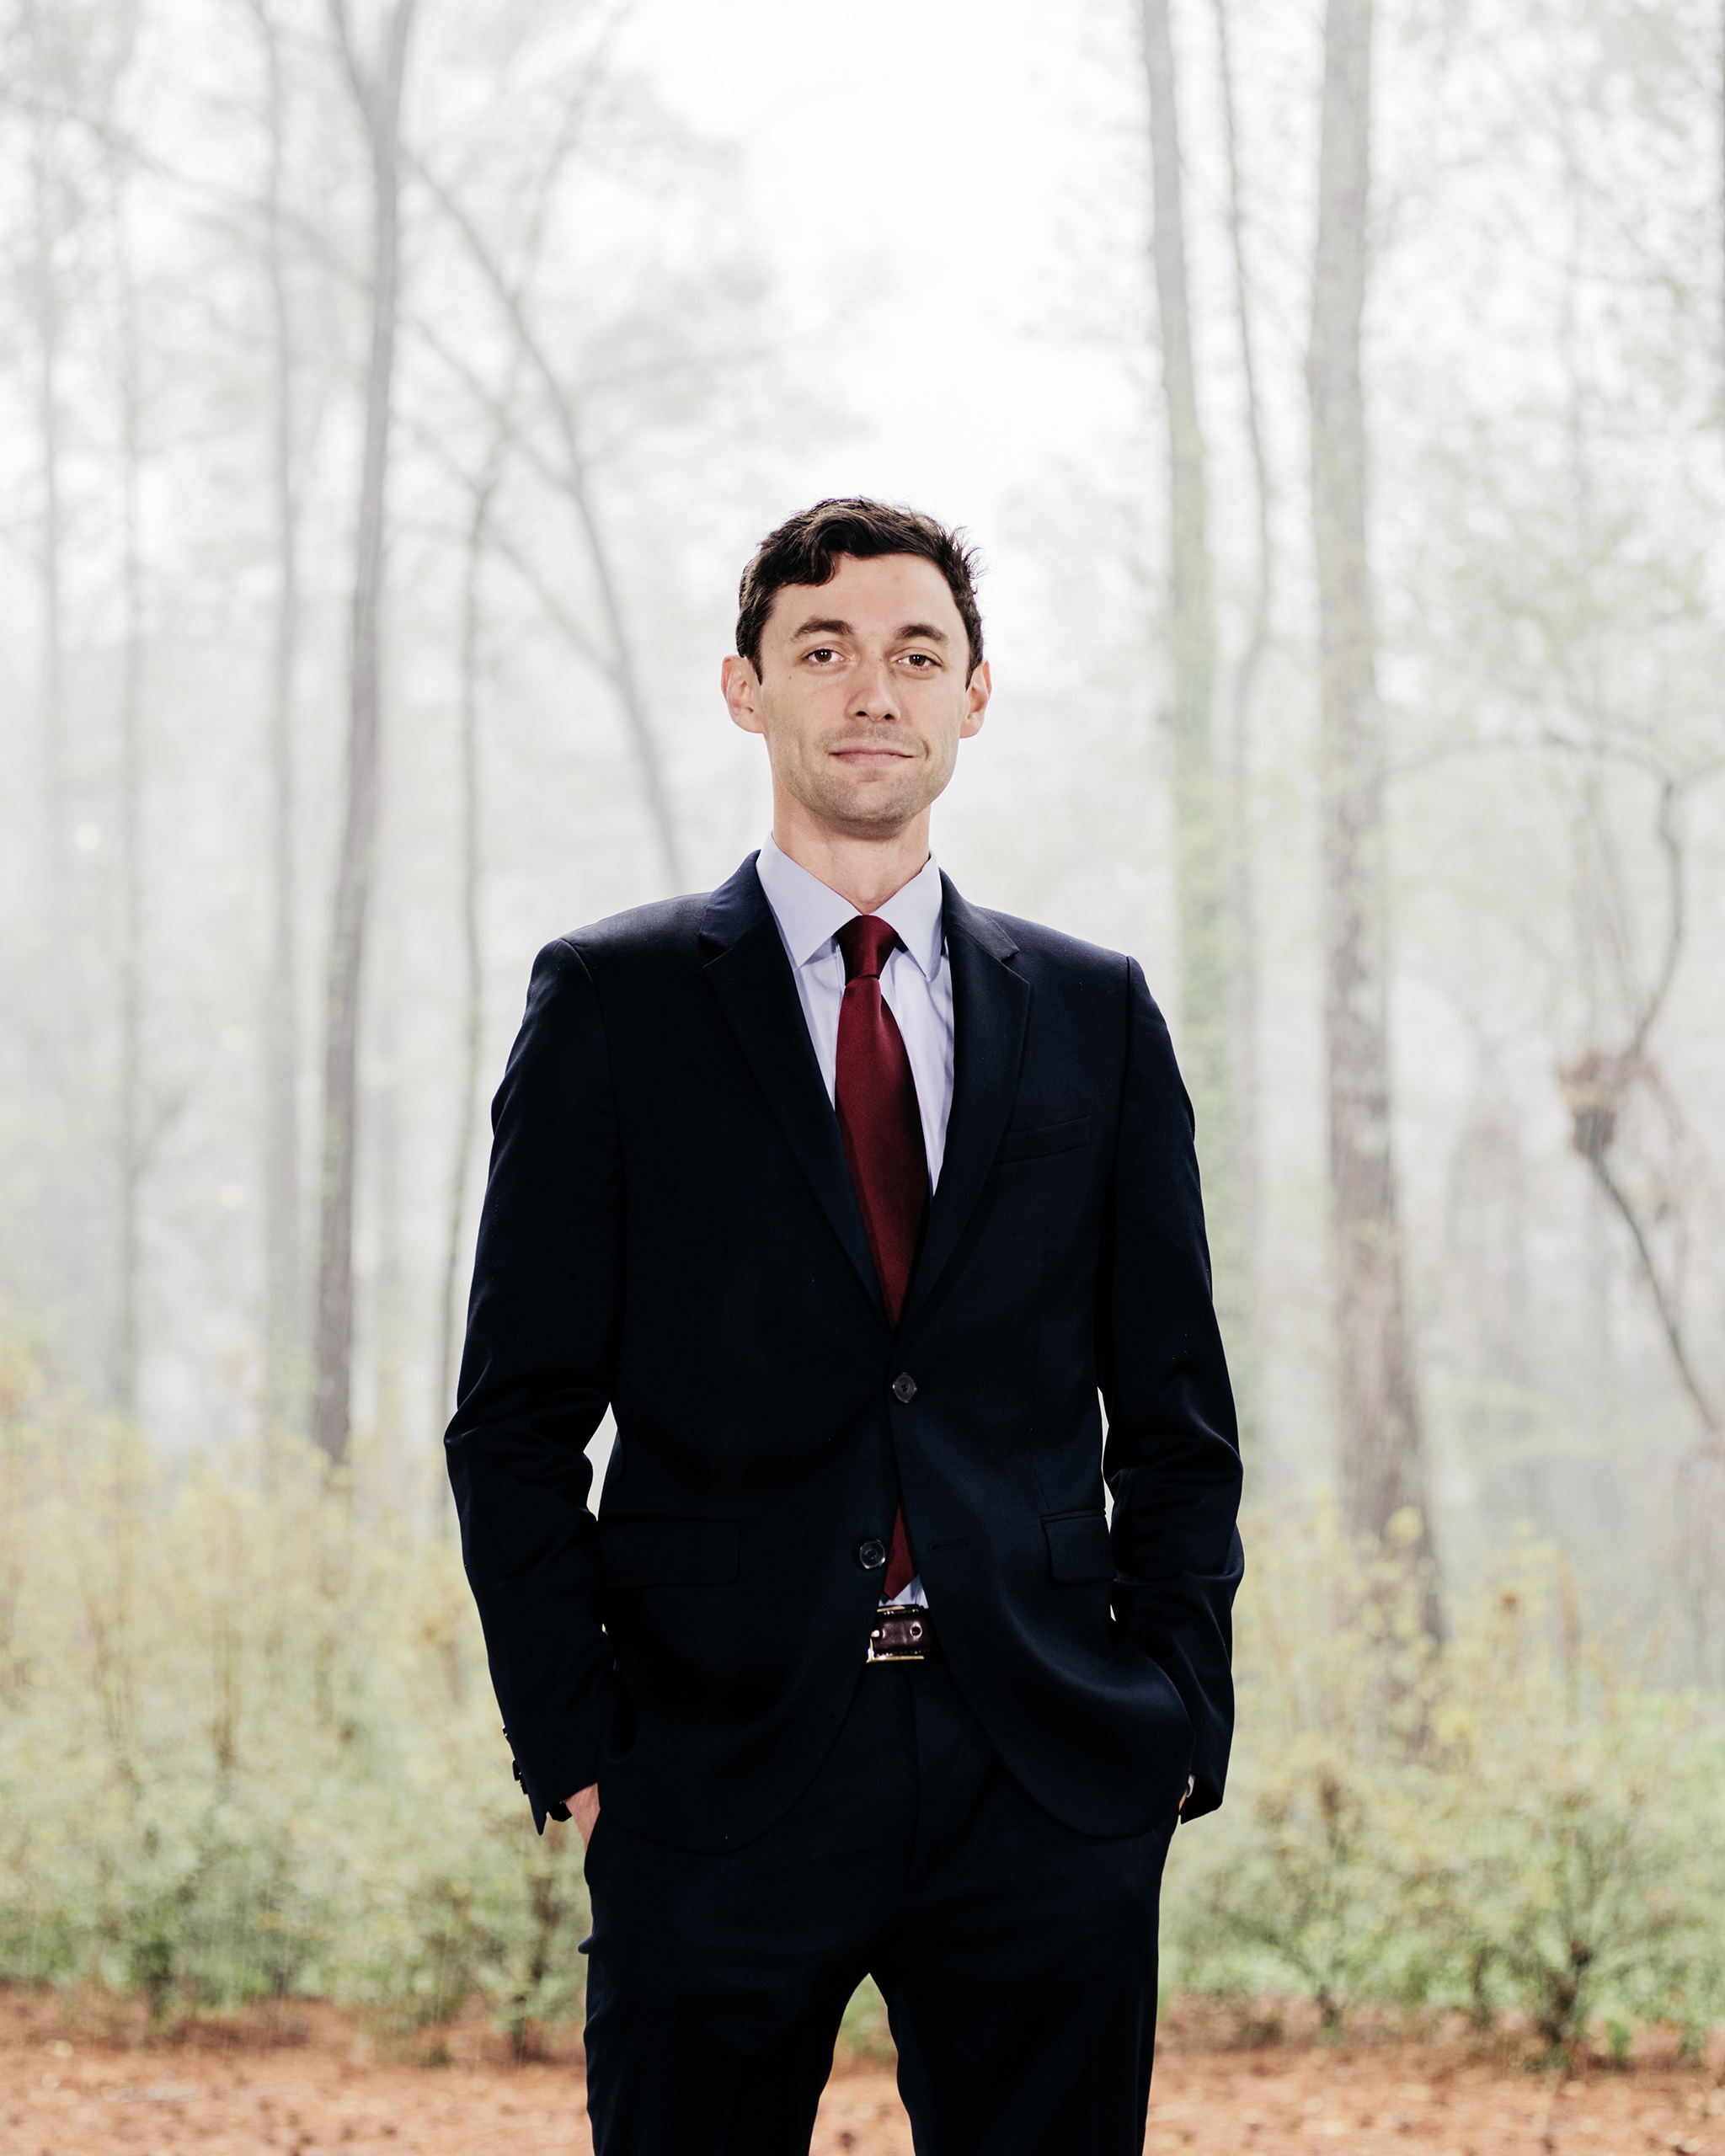 Jon Ossoff, 30. Candidate in Georgia’s 6th Congressional District •Atlanta native with degrees from Georgetown University and the London School of Economics •A former congressional aide, he became CEO of a company that makes documentaries about global issues •Announced his campaign in January with the endorsement of Democratic Representative John Lewis. (Benjamin Rasmussen for TIME)